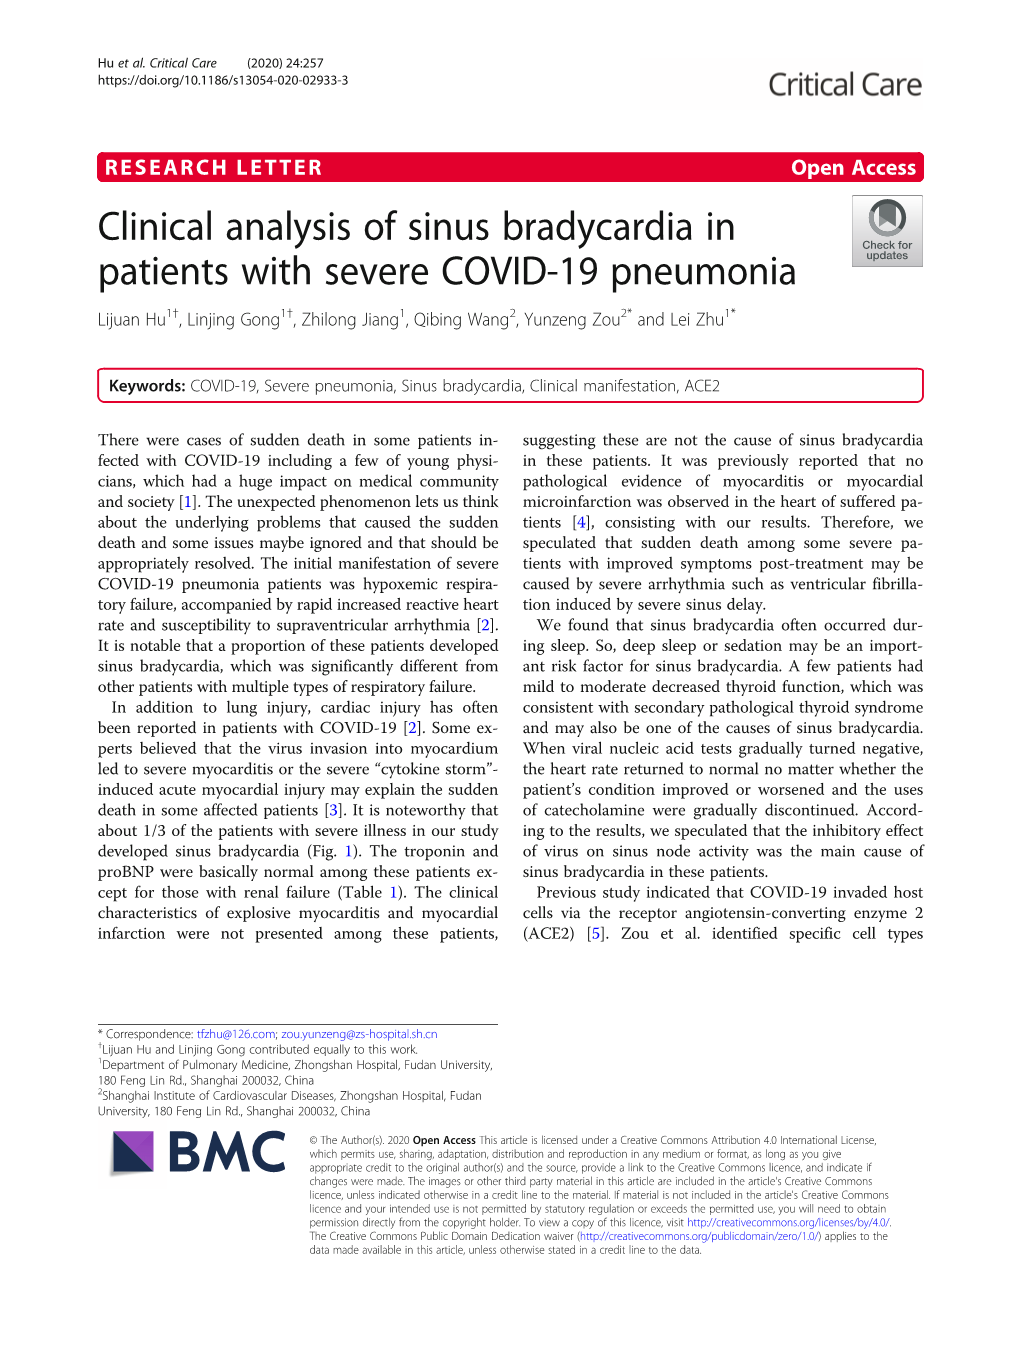 Clinical Analysis of Sinus Bradycardia in Patients with Severe COVID-19 Pneumonia